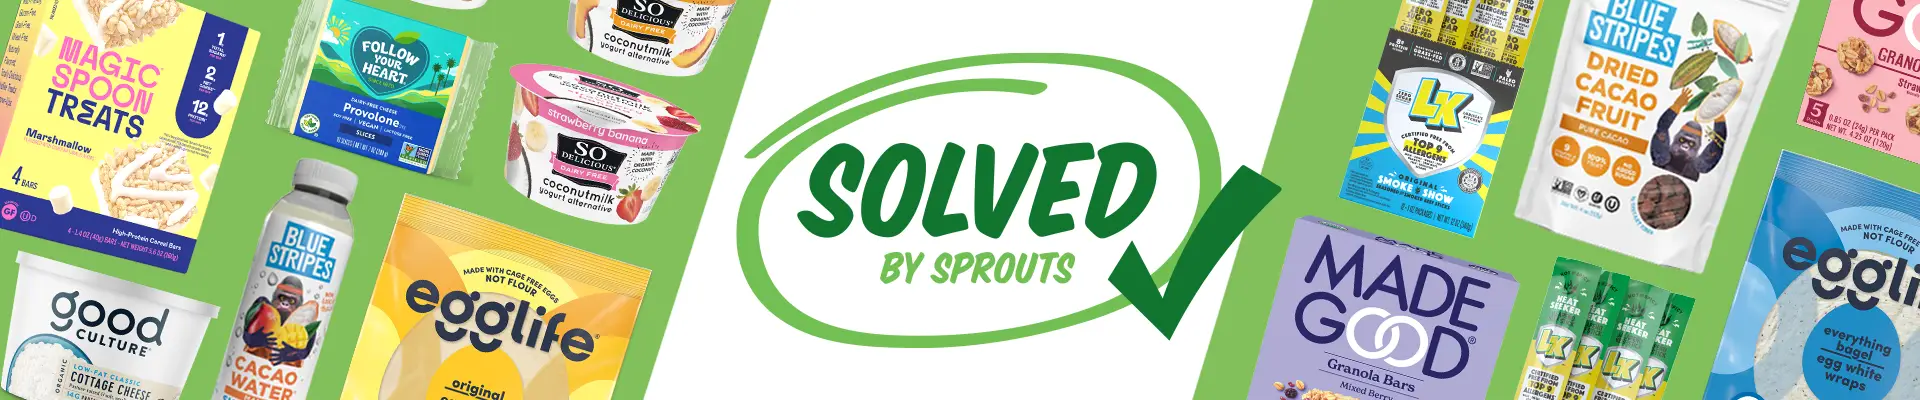 solved by sprouts logo surrounded by back to school favorites